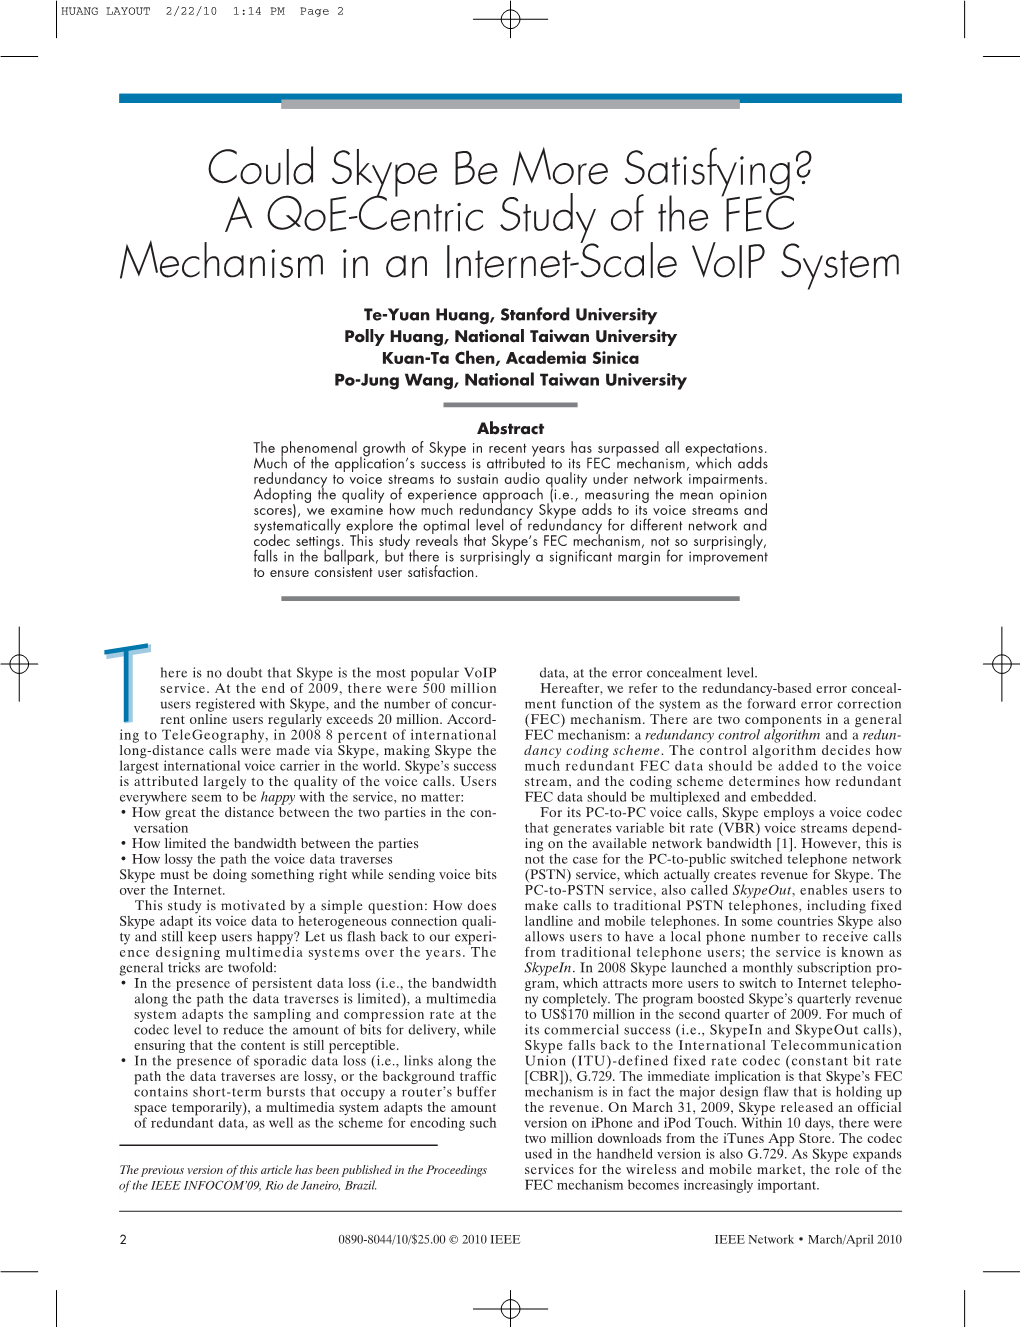 Can Skype Be More Satisfying? a Qoe-Centric Study of the FEC